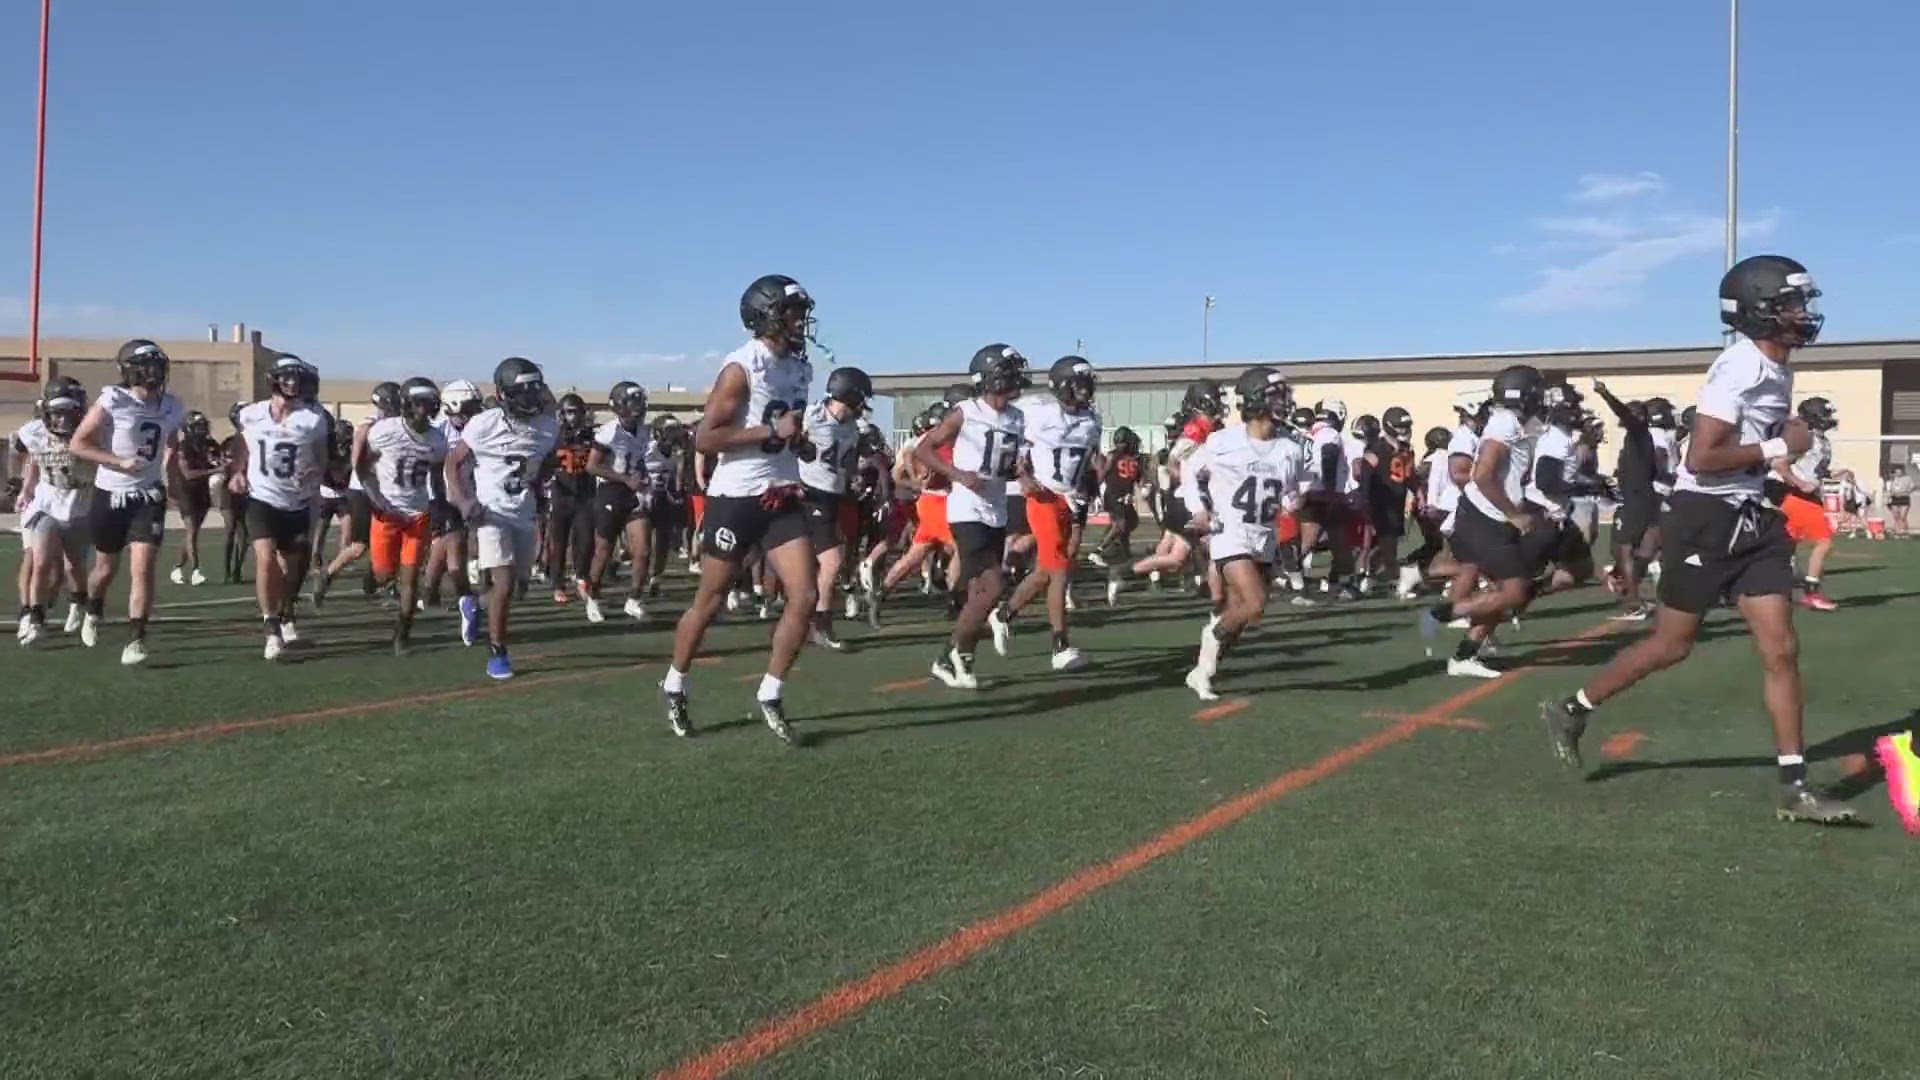 There's a lot of hype surrounding the new era of UTPB. Here's what to expect from the new look Falcons.